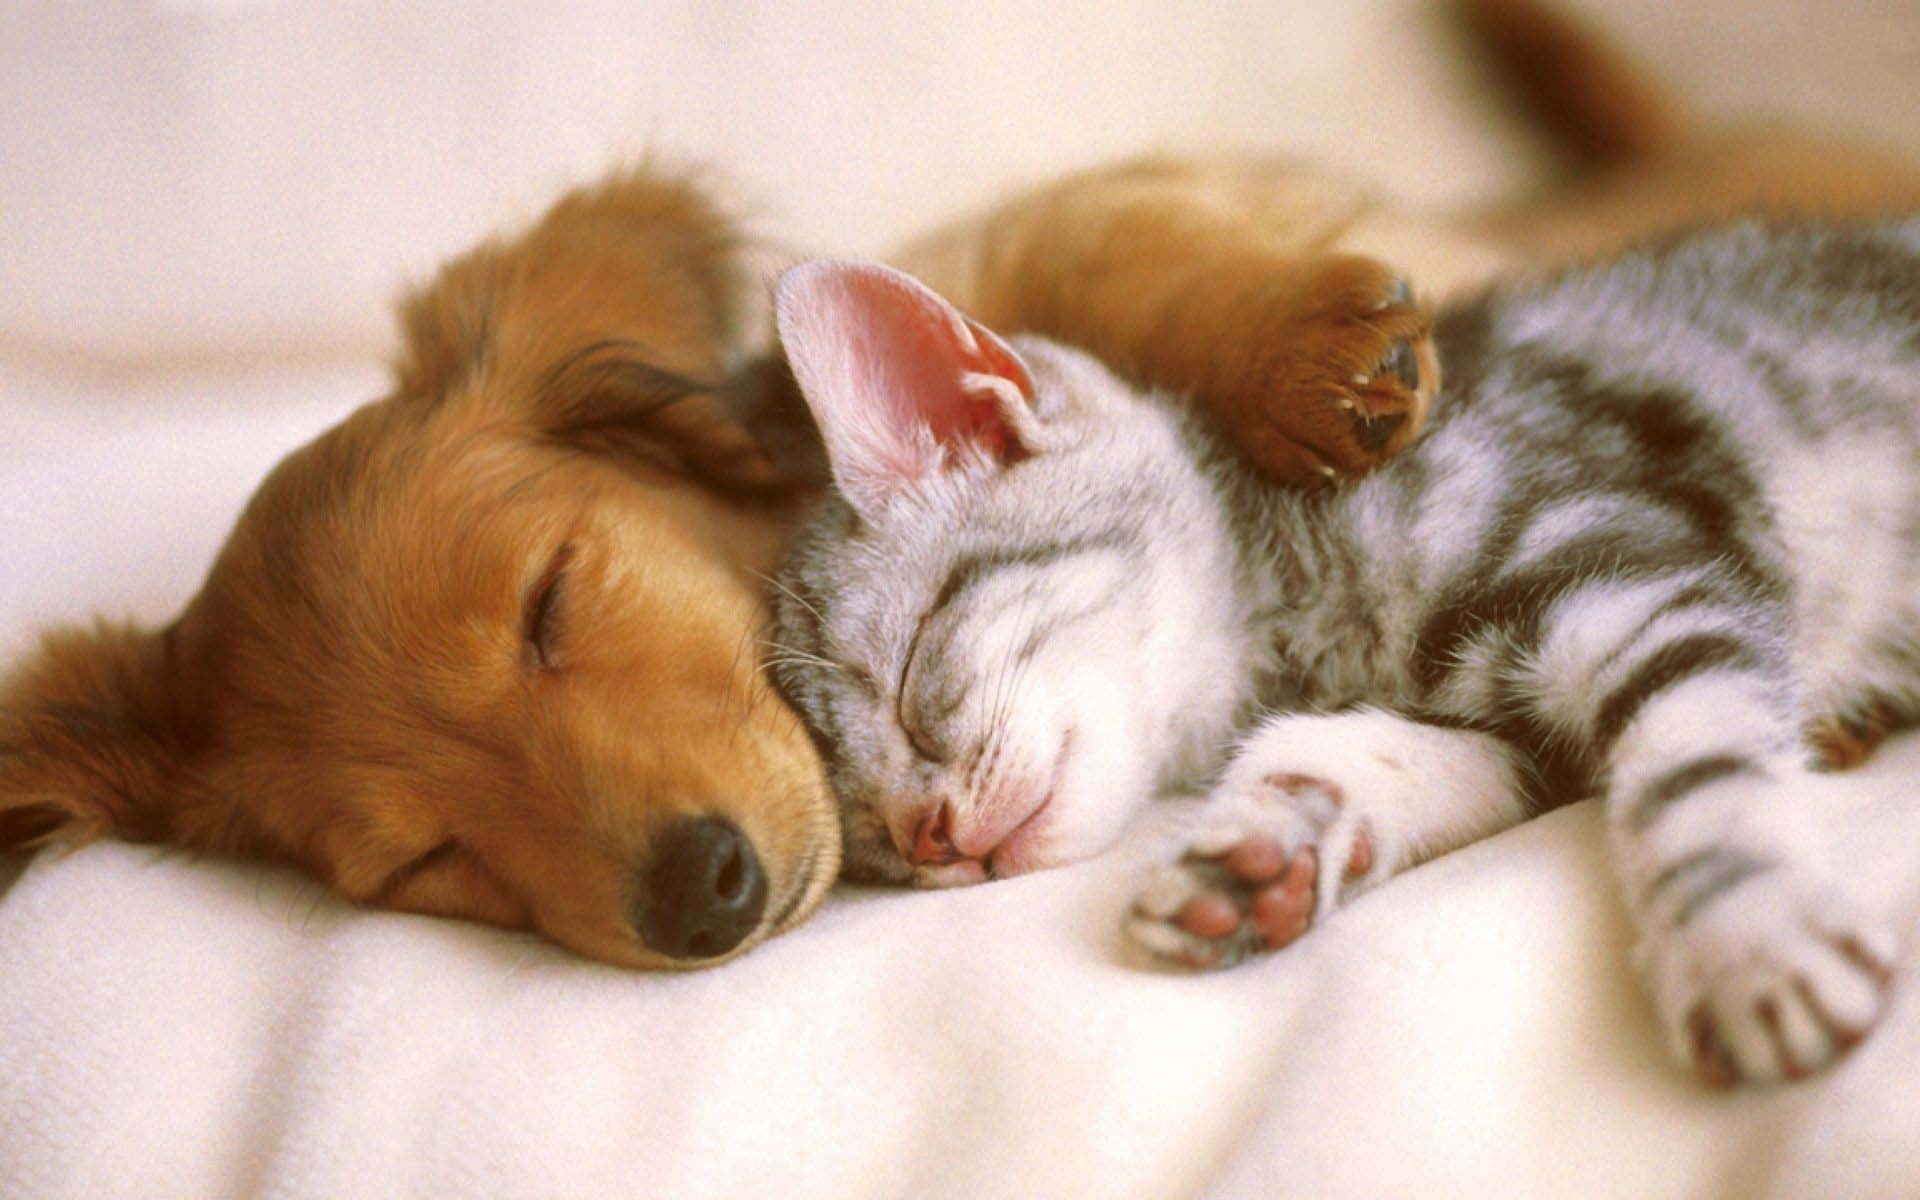 10 Latest Puppy And Kitten Backgrounds FULL HD 1920×1080 For PC Desktop